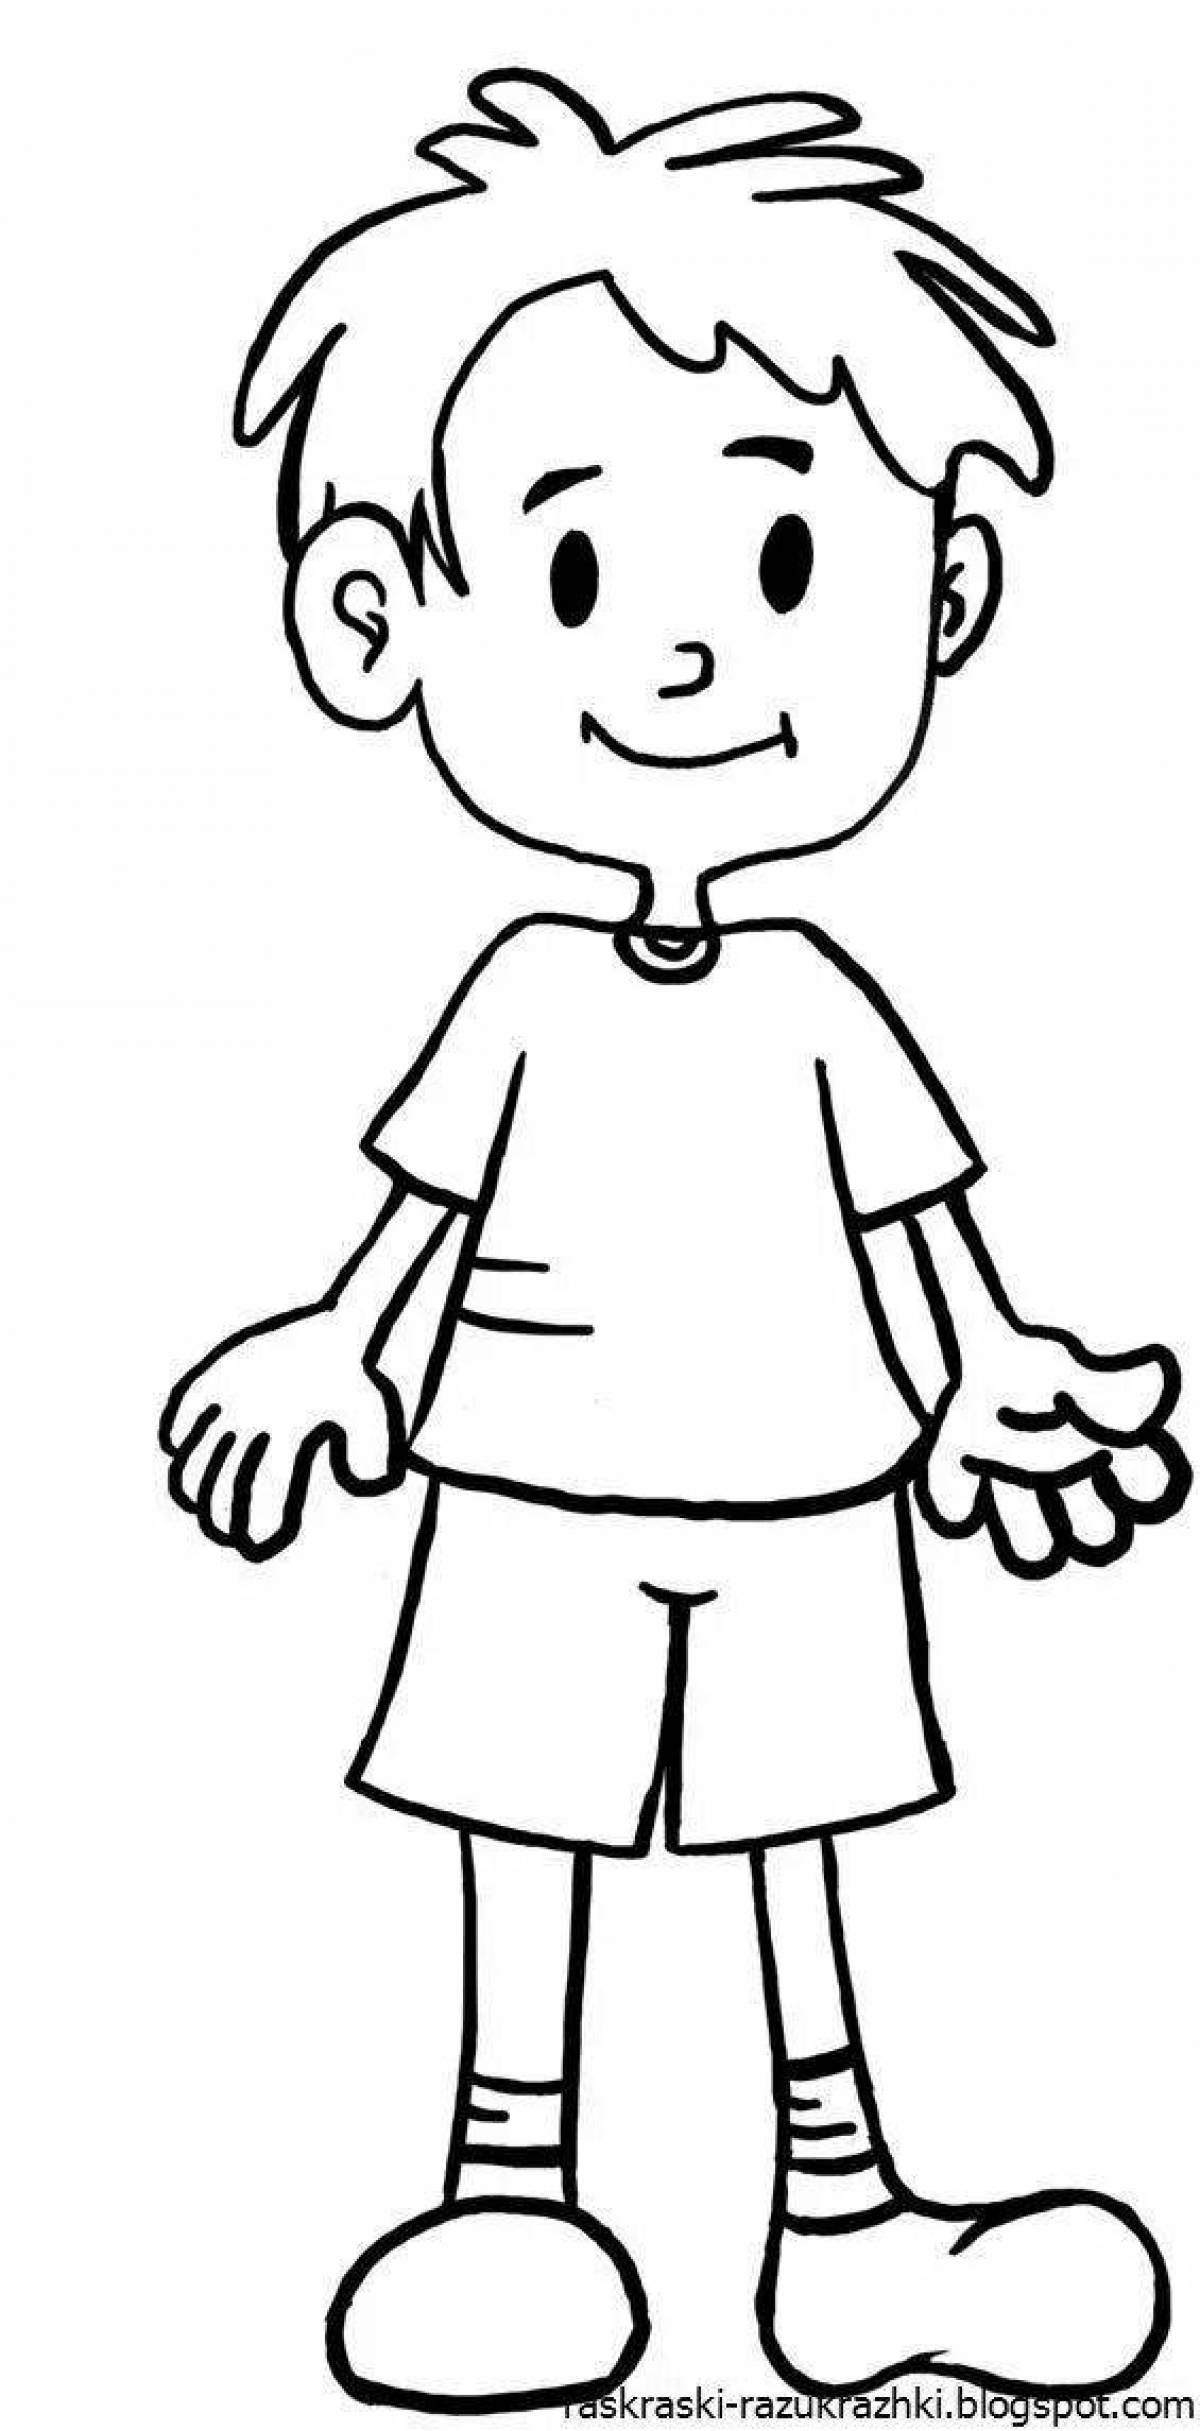 Color-frenzy coloring page person for 3-4 year olds